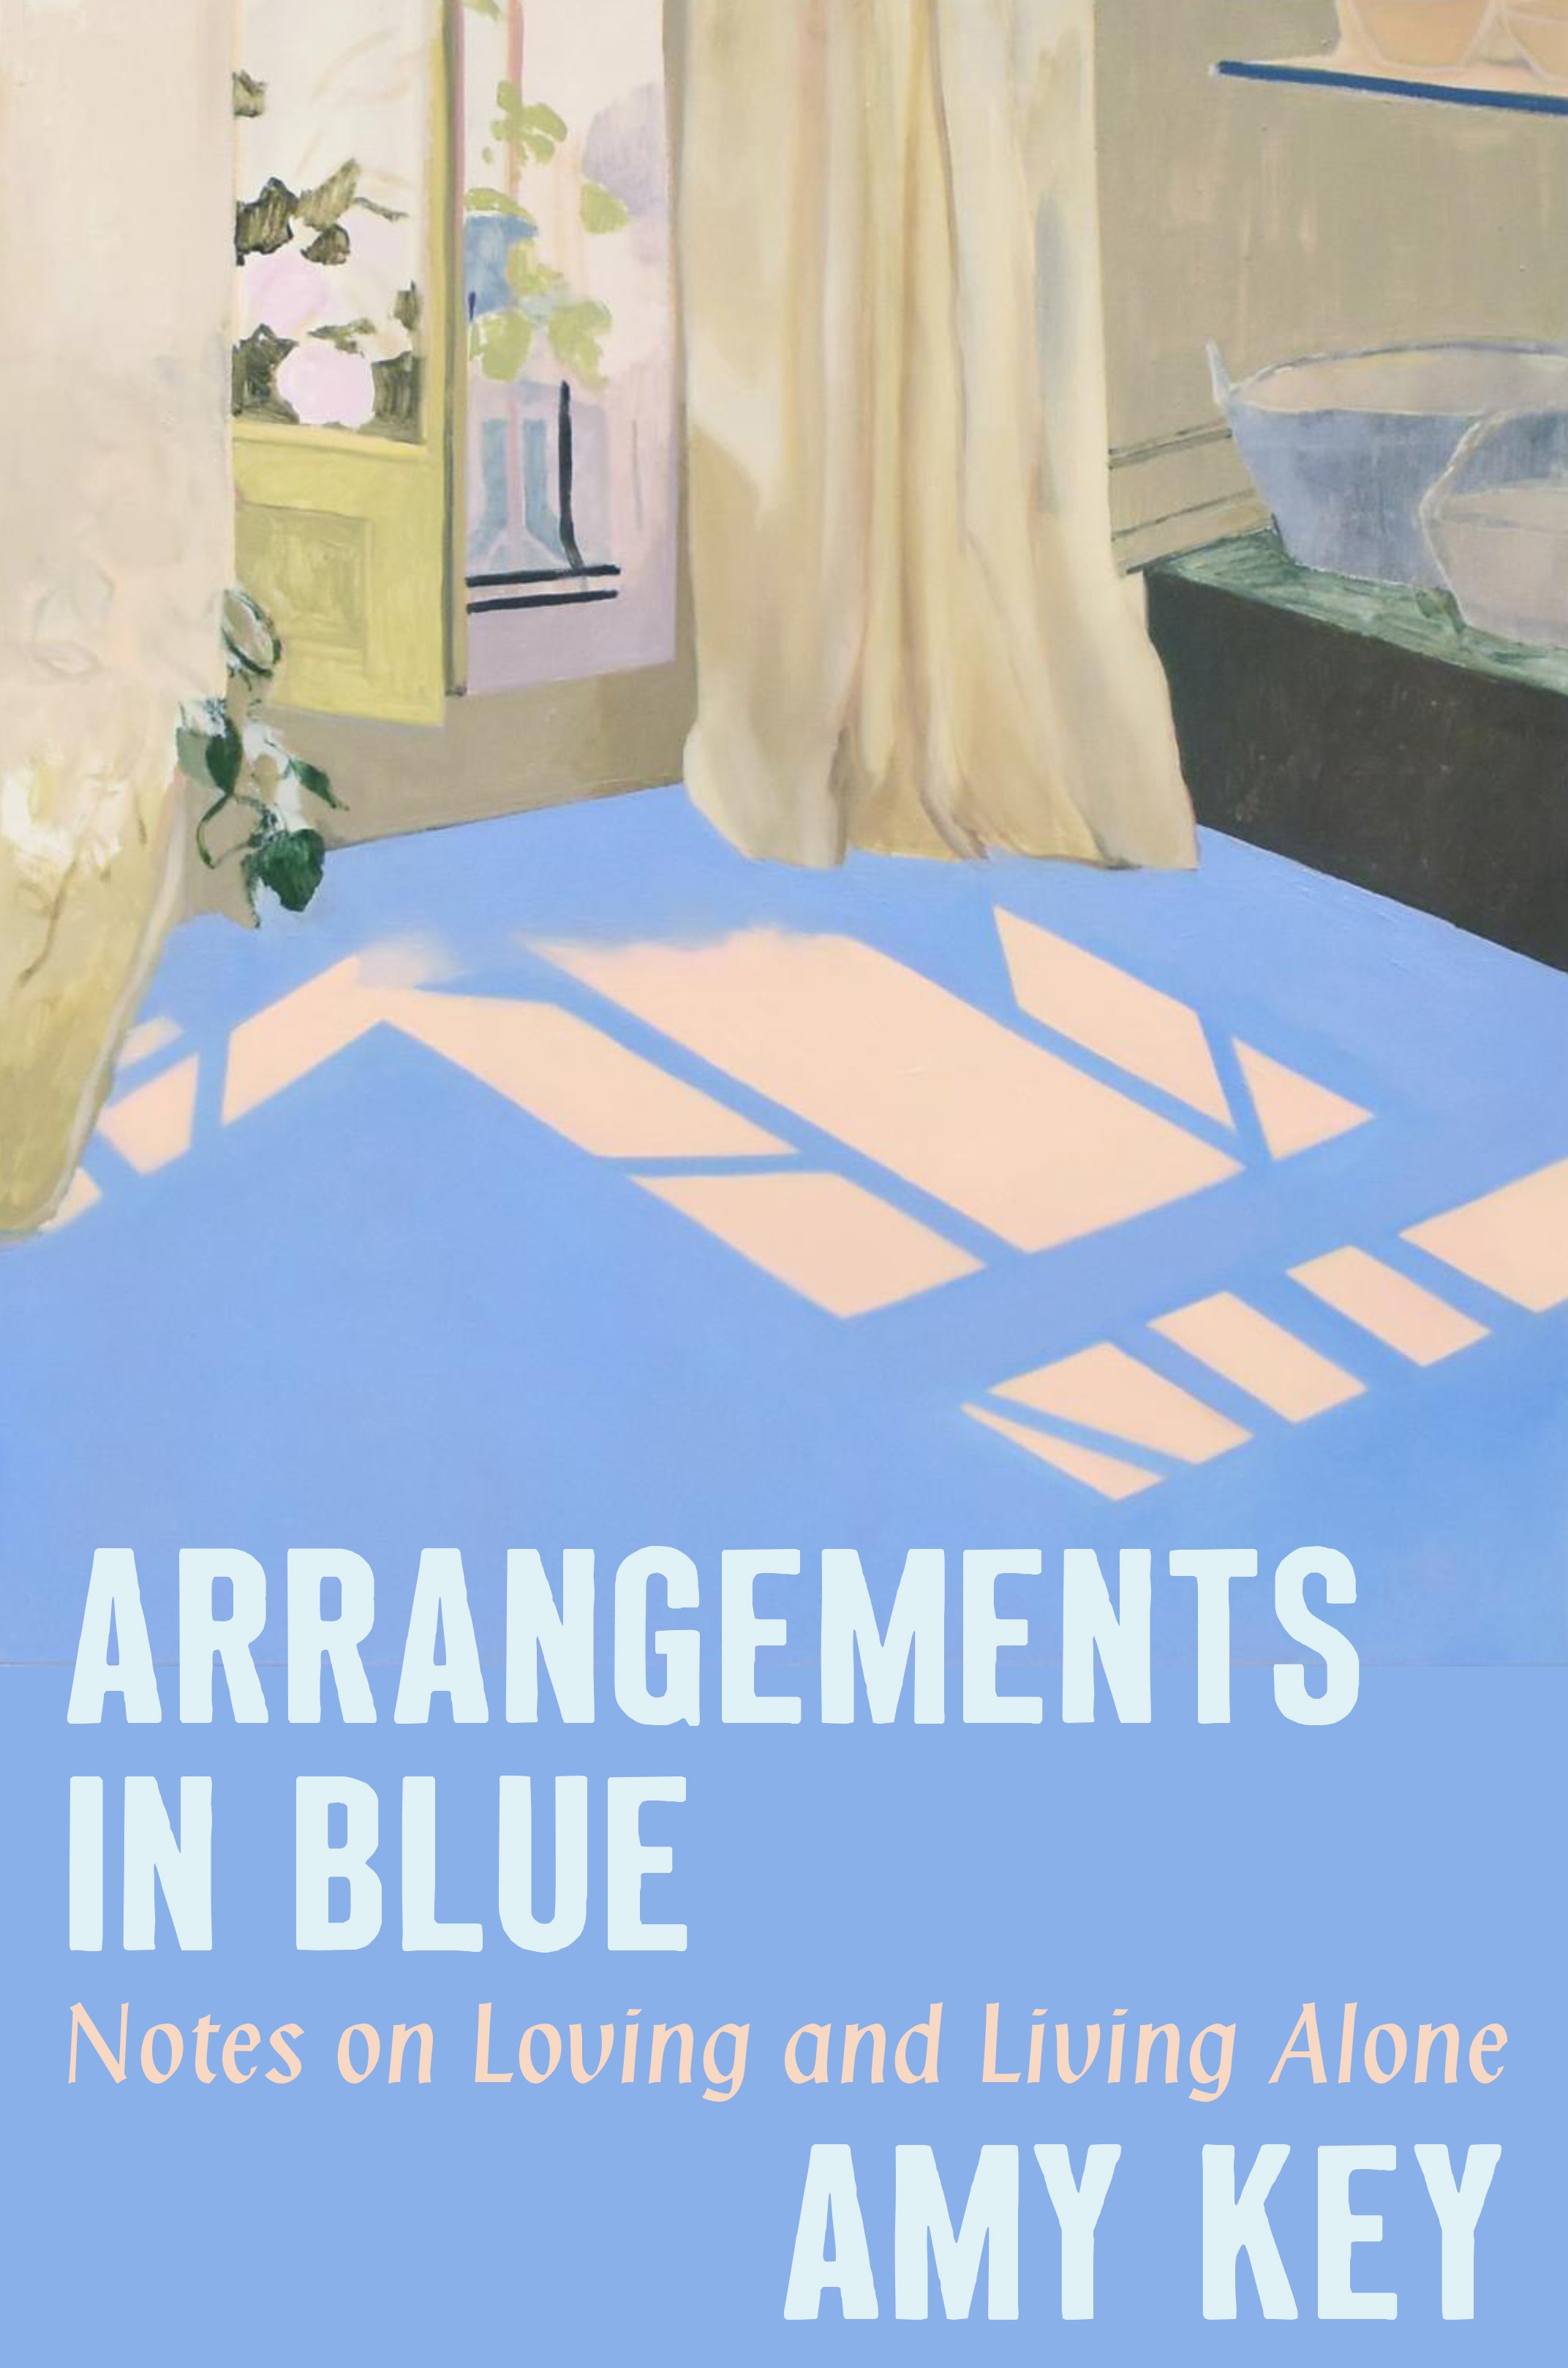 The cover of Arrangements in Blue.